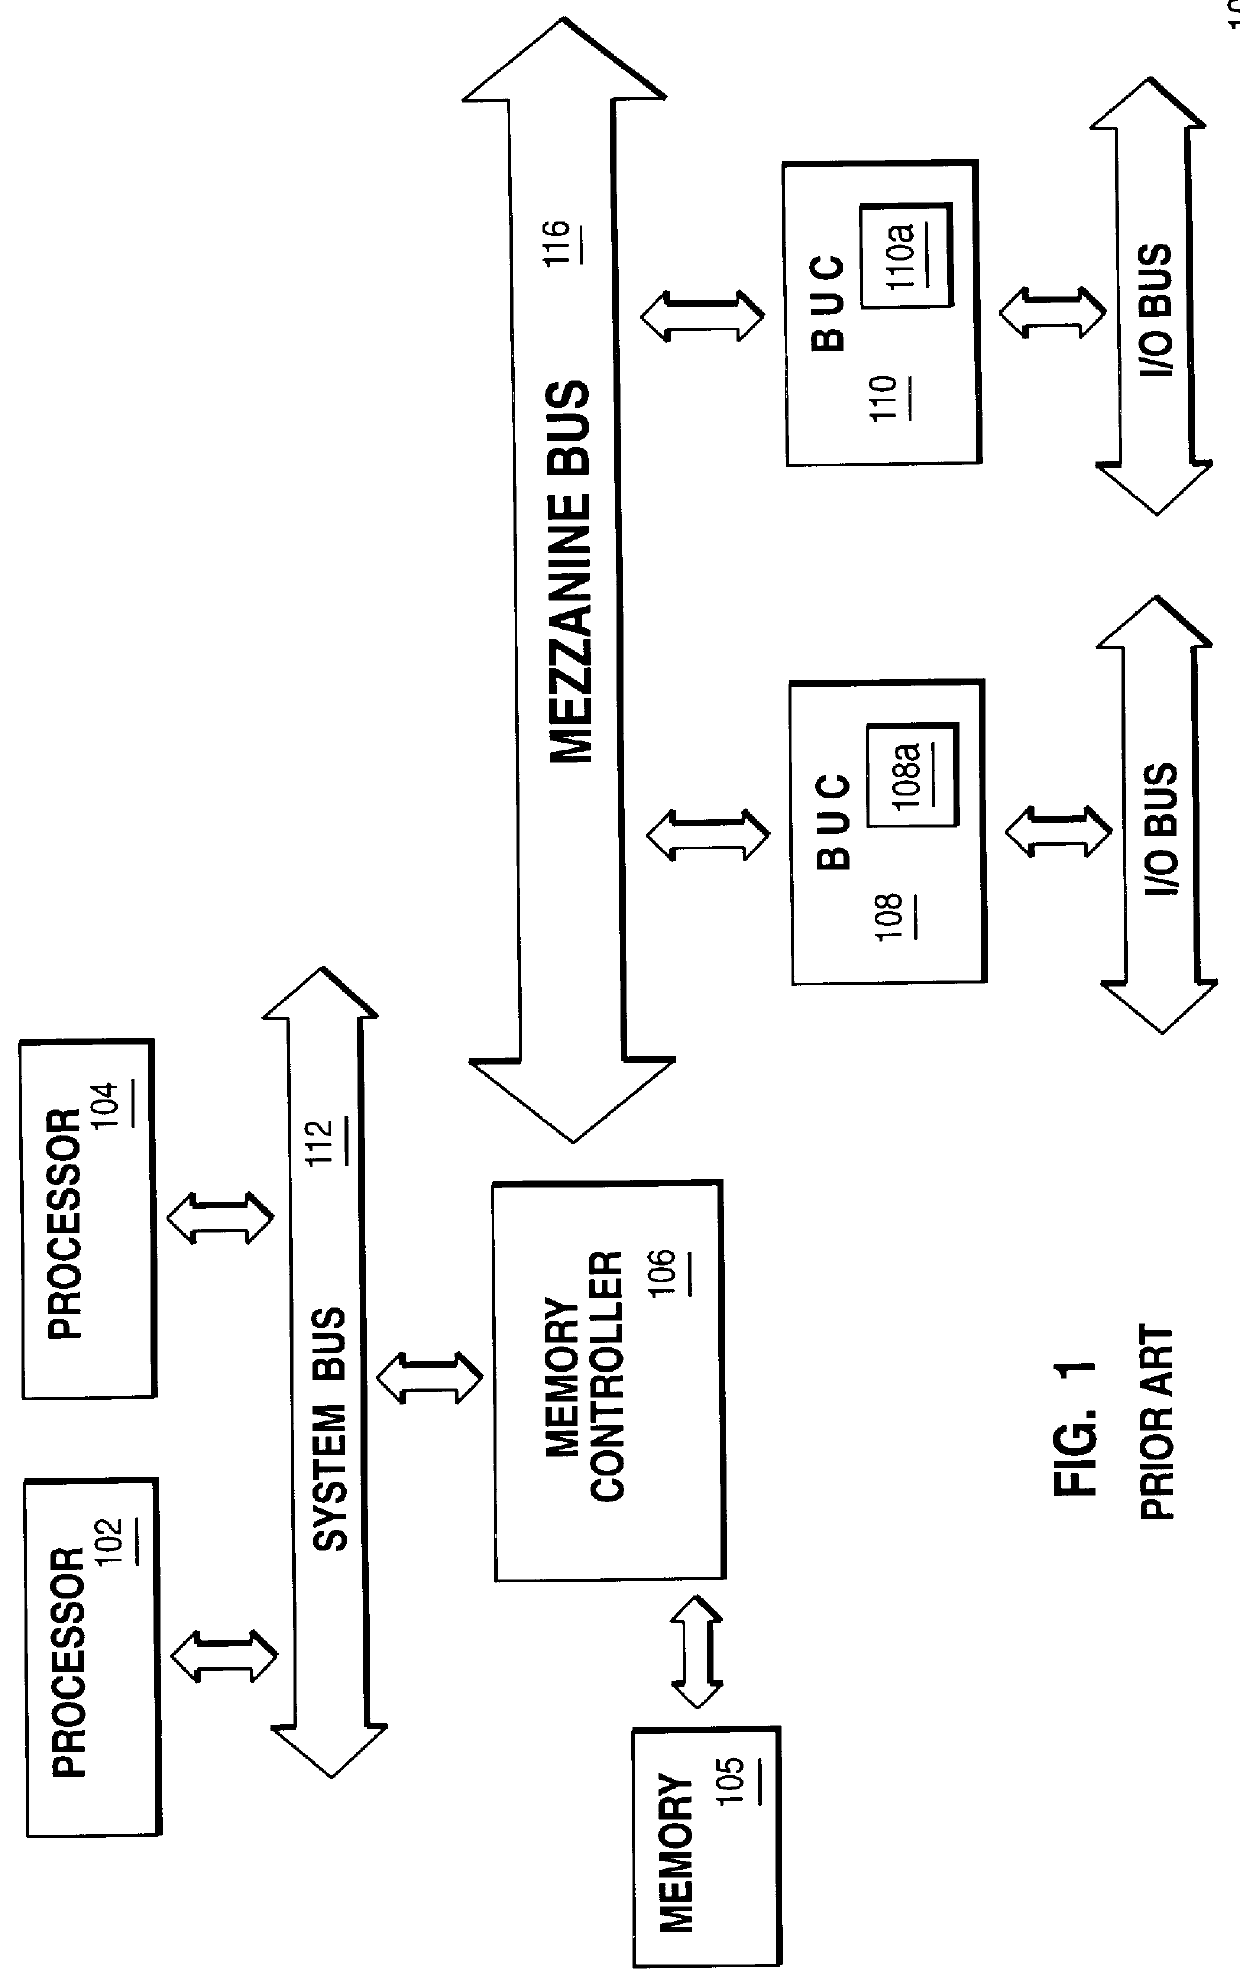 Method and apparatus for reducing system snoop latency